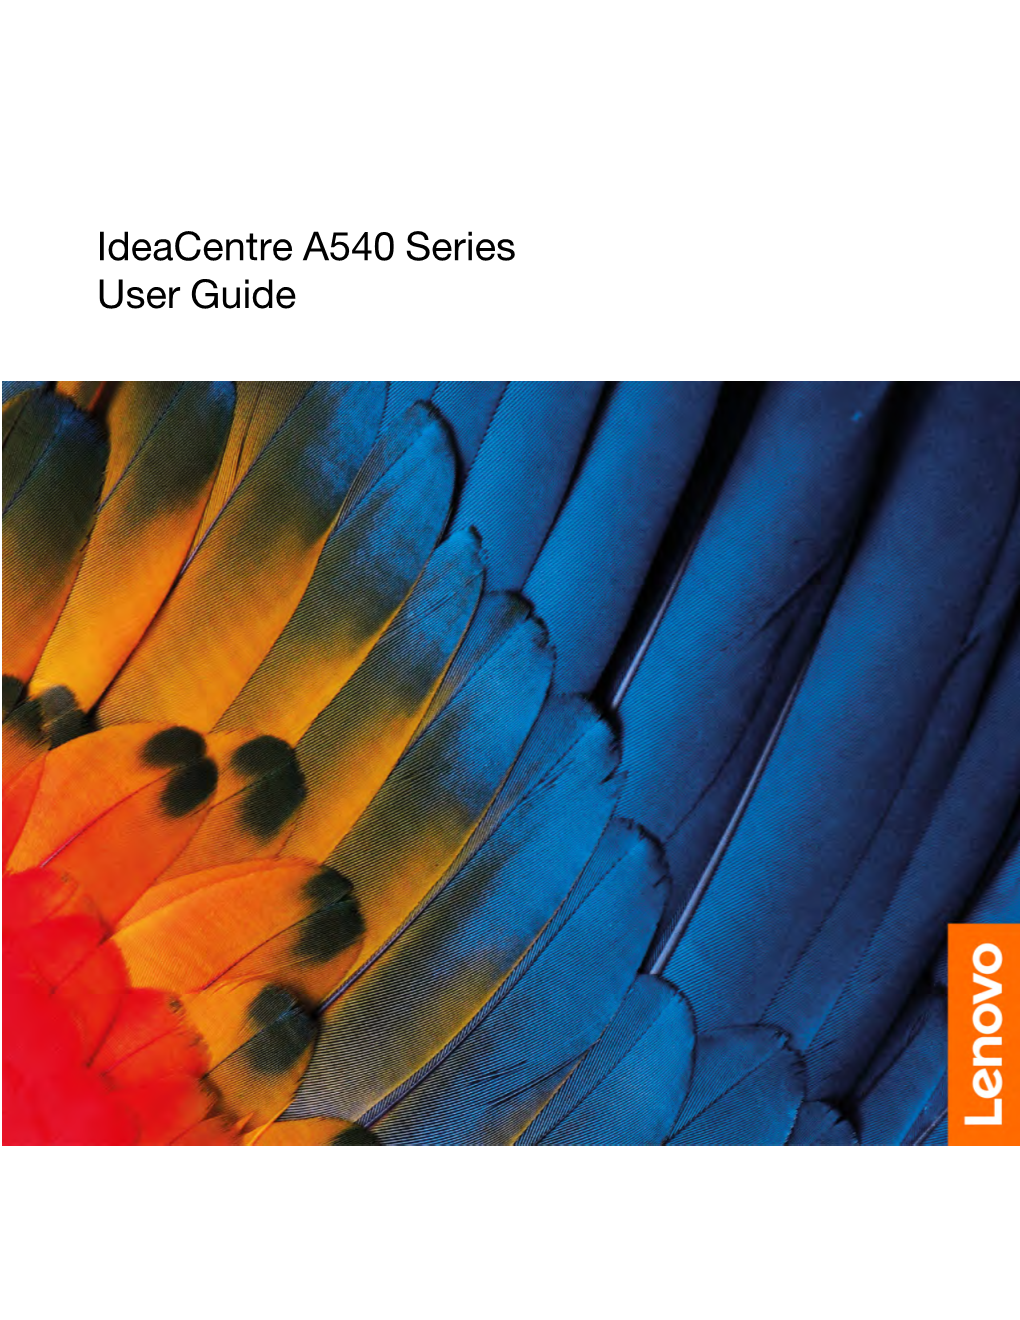 Ideacentre A540 Series User Guide Read This First